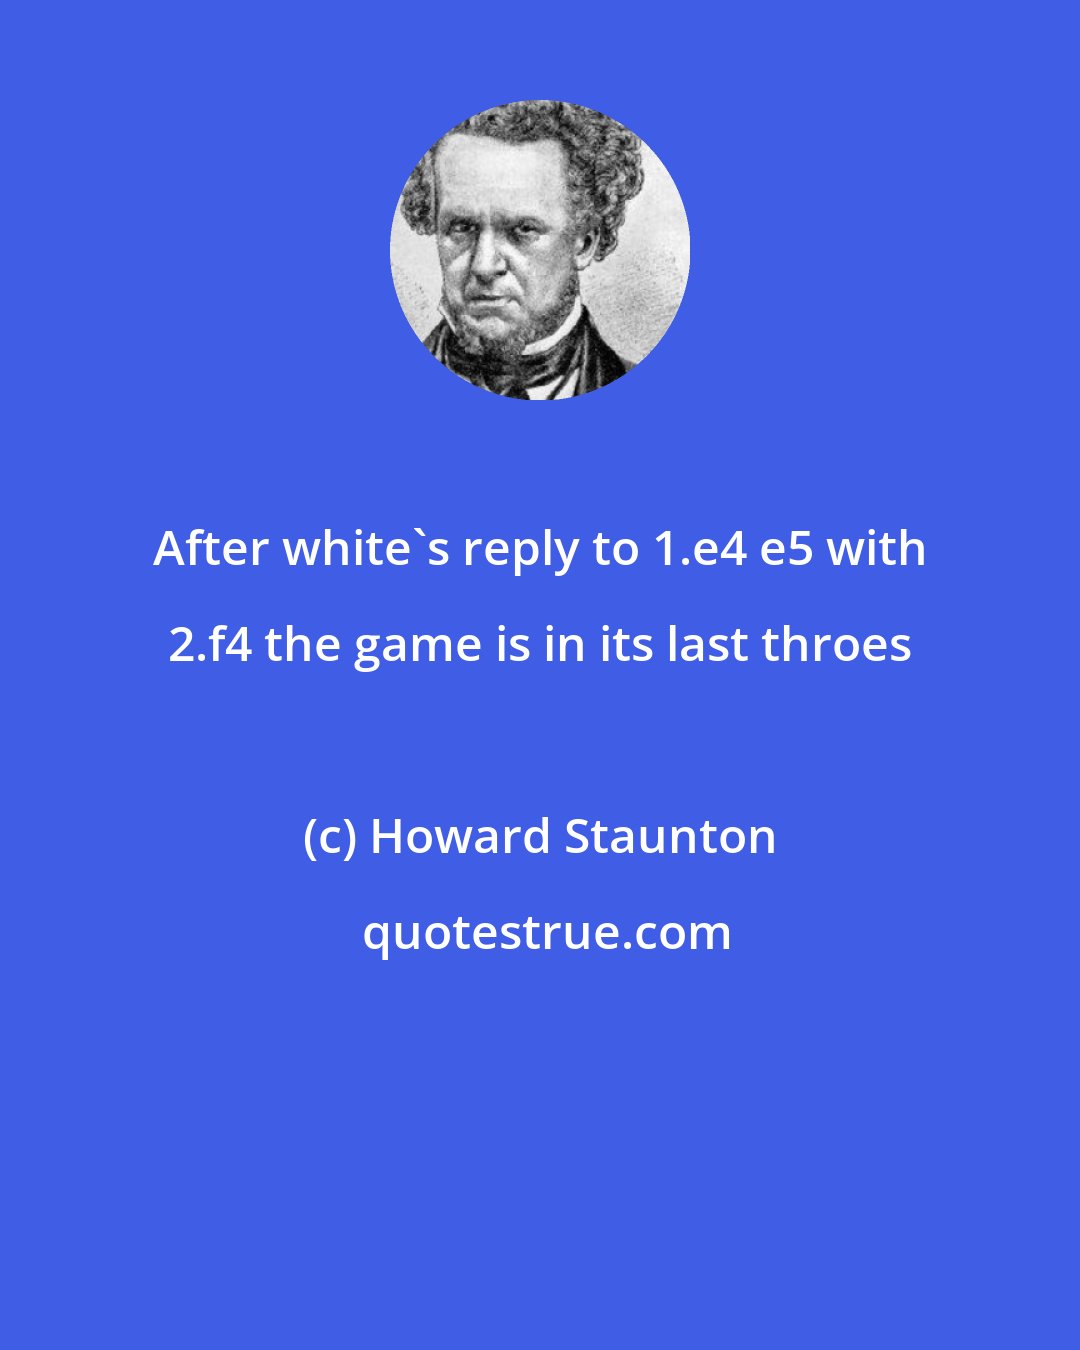 Howard Staunton: After white's reply to 1.e4 e5 with 2.f4 the game is in its last throes